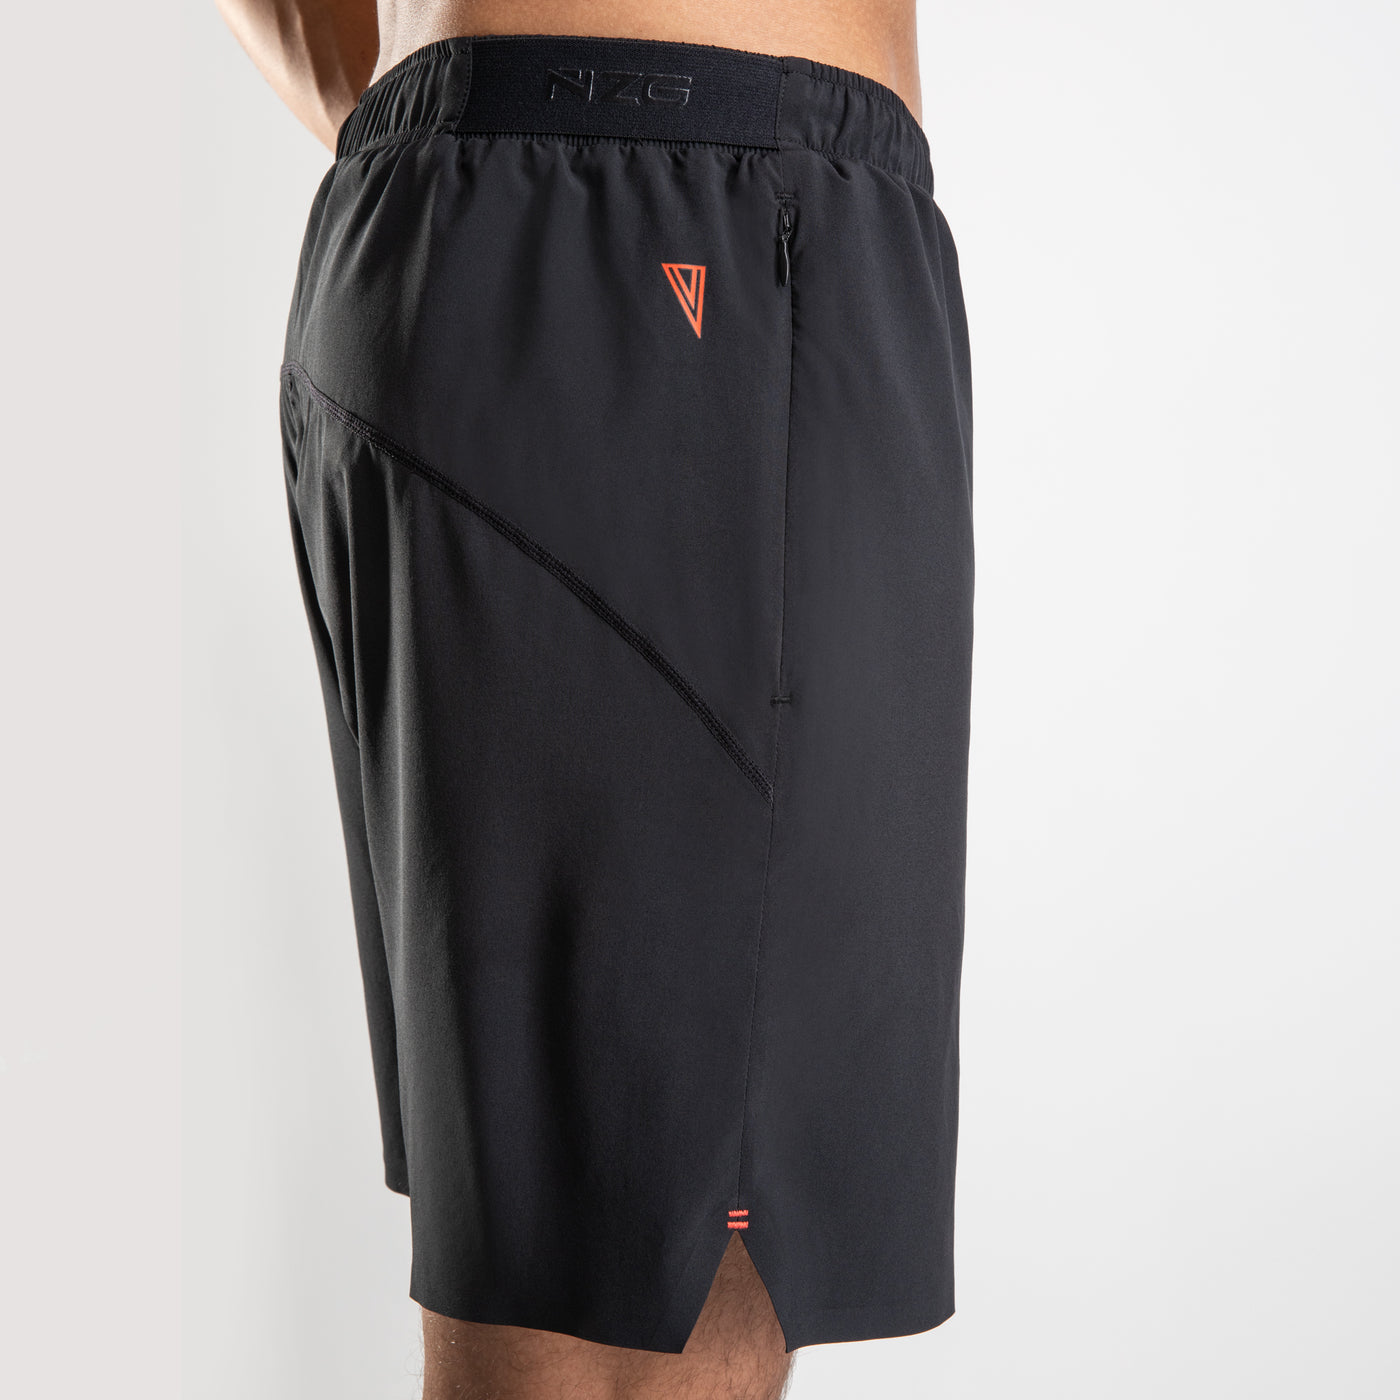 NonZero Gravity Men’s ZinTex Eco Running Shorts with Lining made with Recycled Polyester & Spandex in Coal 